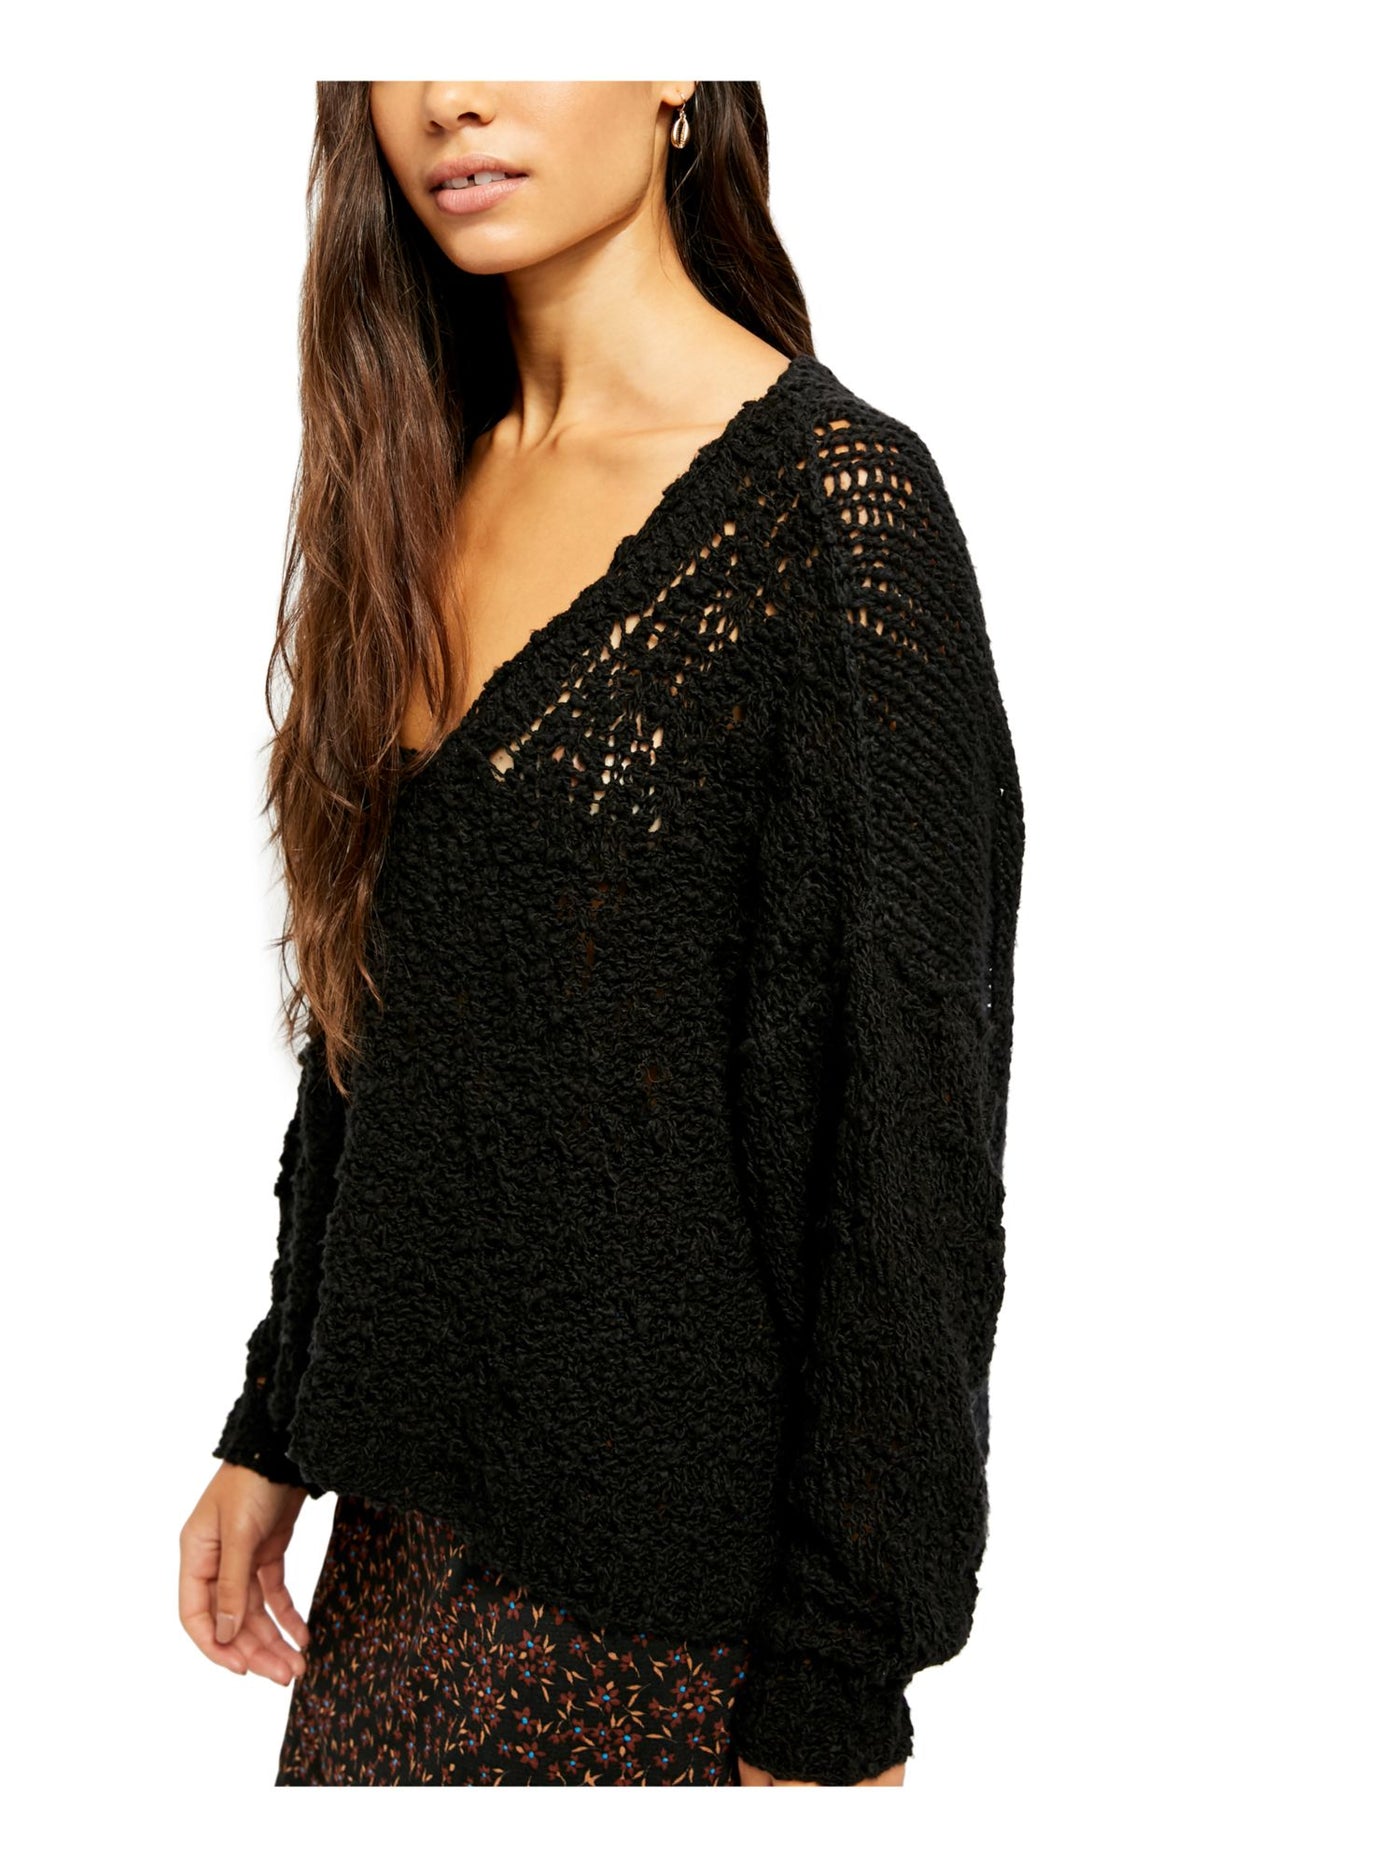 FREE PEOPLE Womens Black Textured Long Sleeve V Neck Sweater M